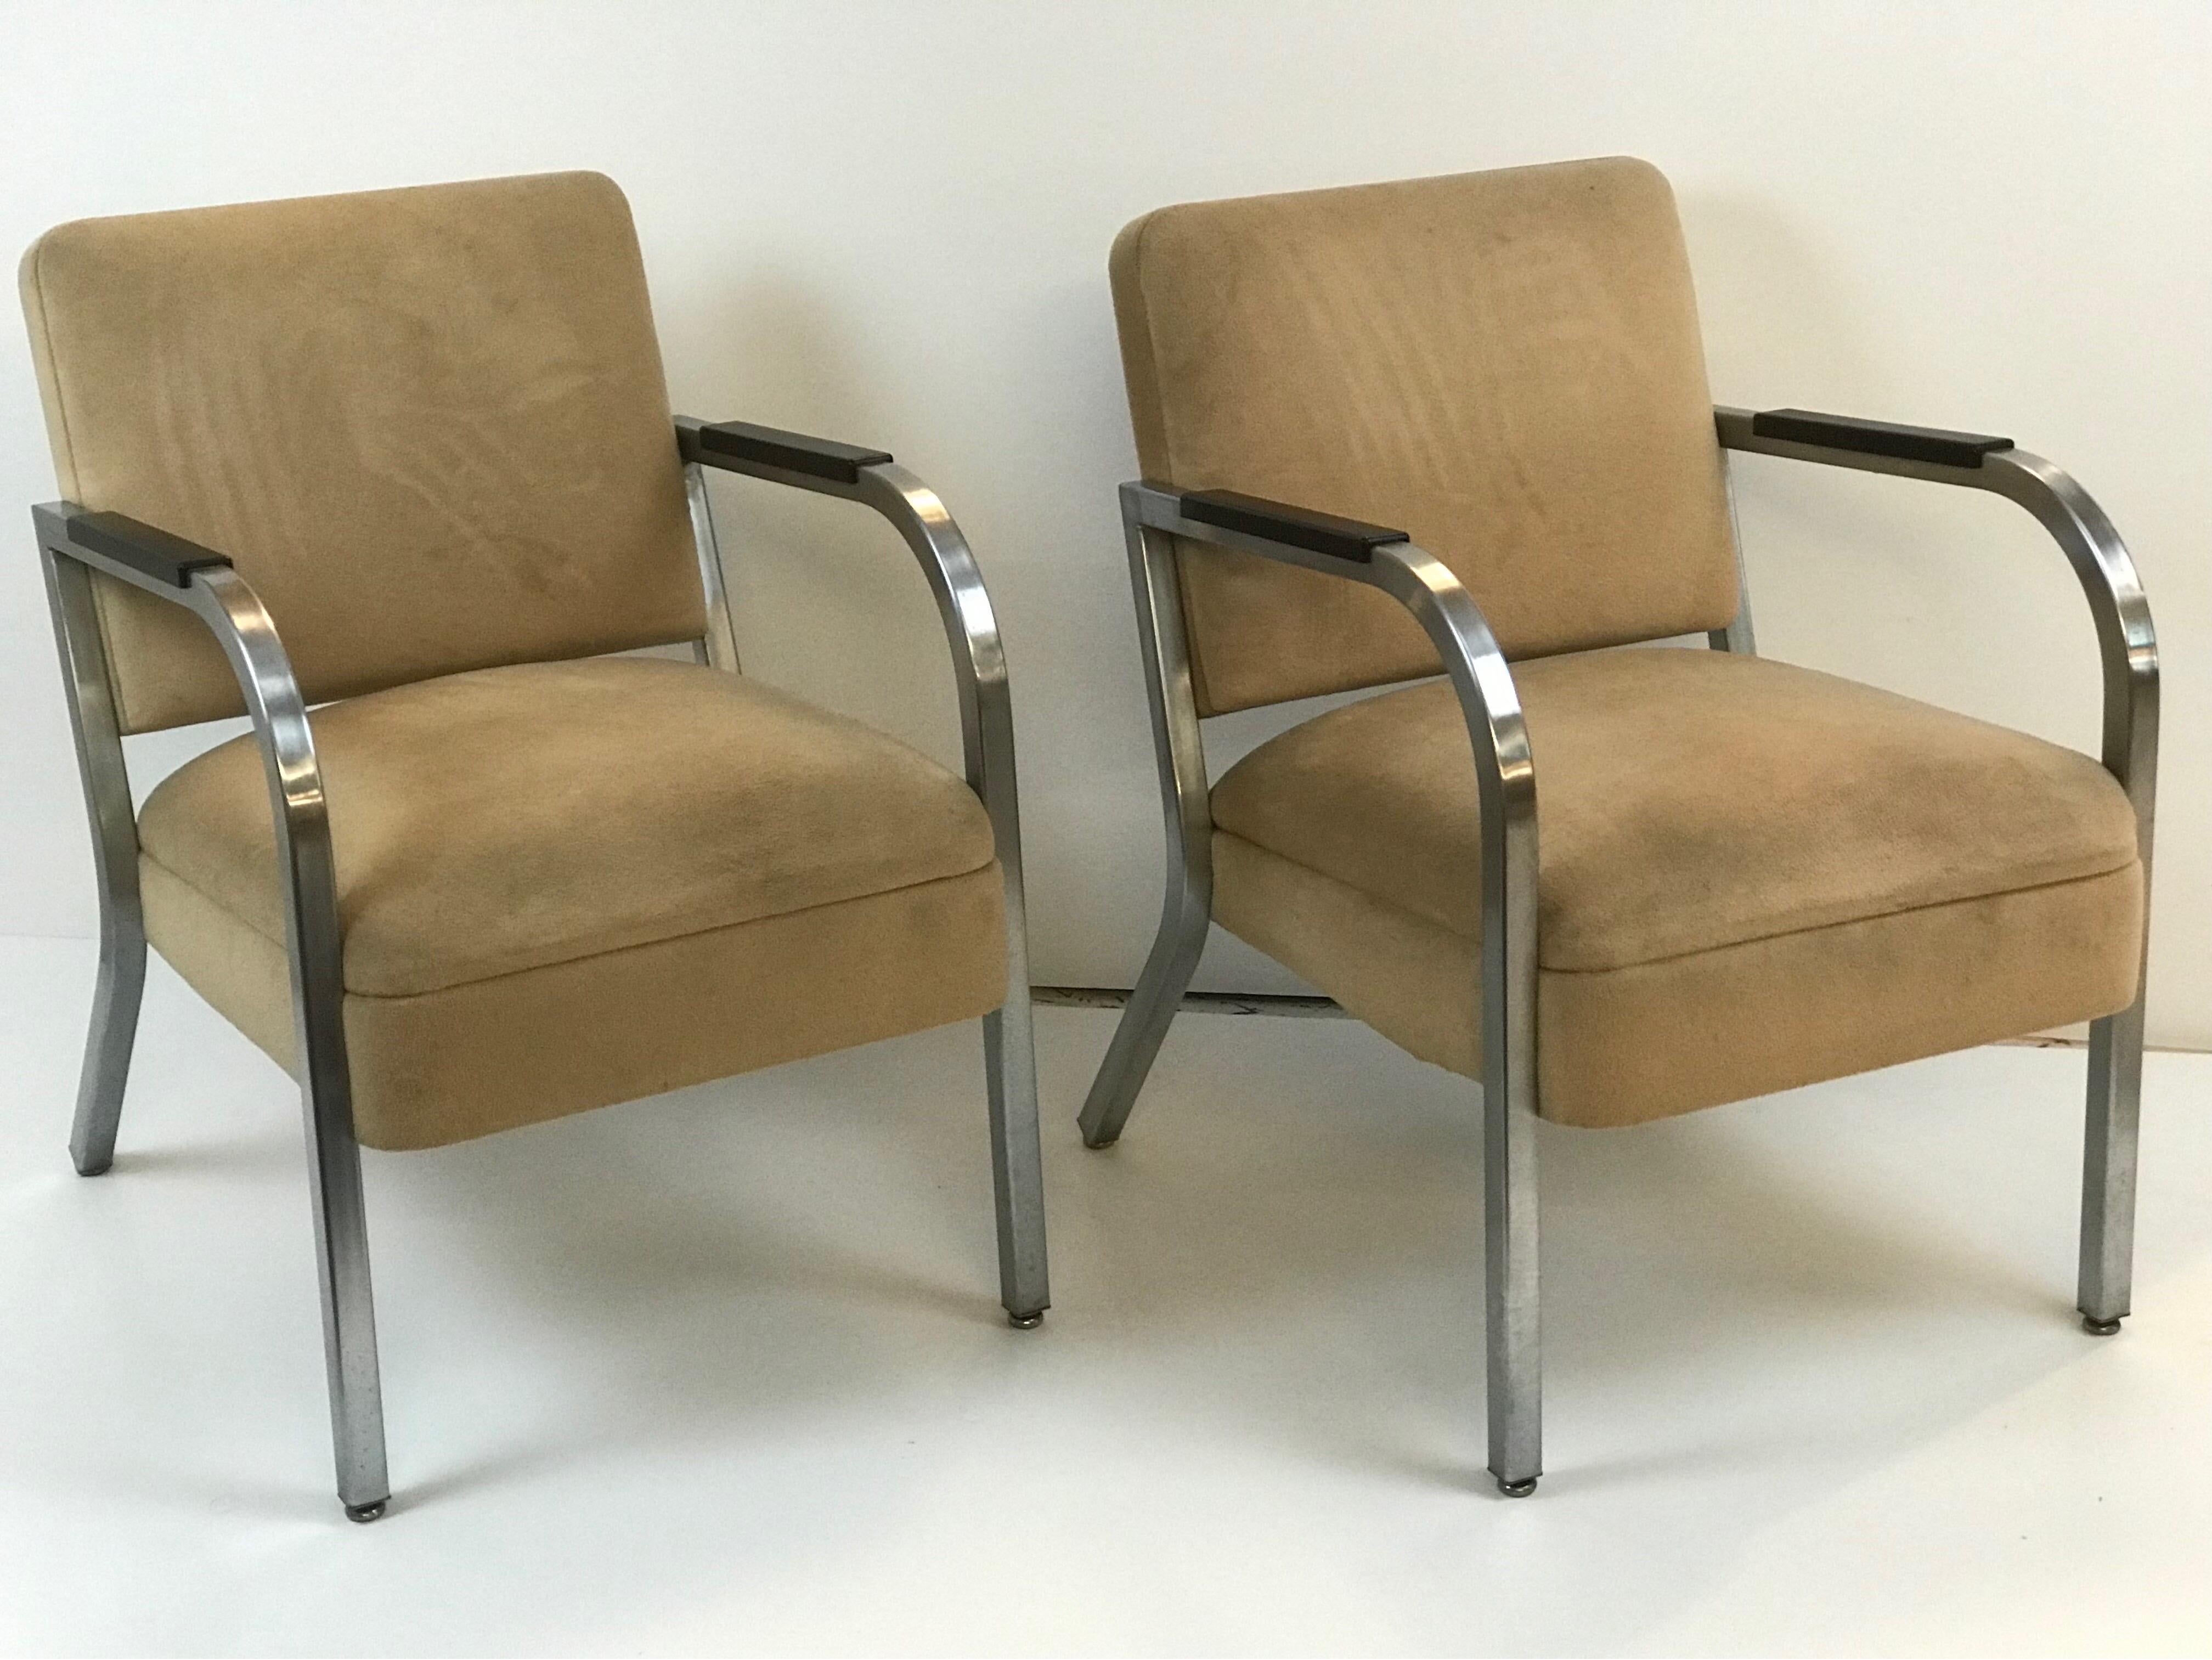 A pair of 1960's petite bent square steel tubing club chairs with black melamine arms set on medium luster polished stainless steel exposed framing with newer 2000's era tan Ultrasuede upholstery. 
Unknown origins as they are untagged and don't pop